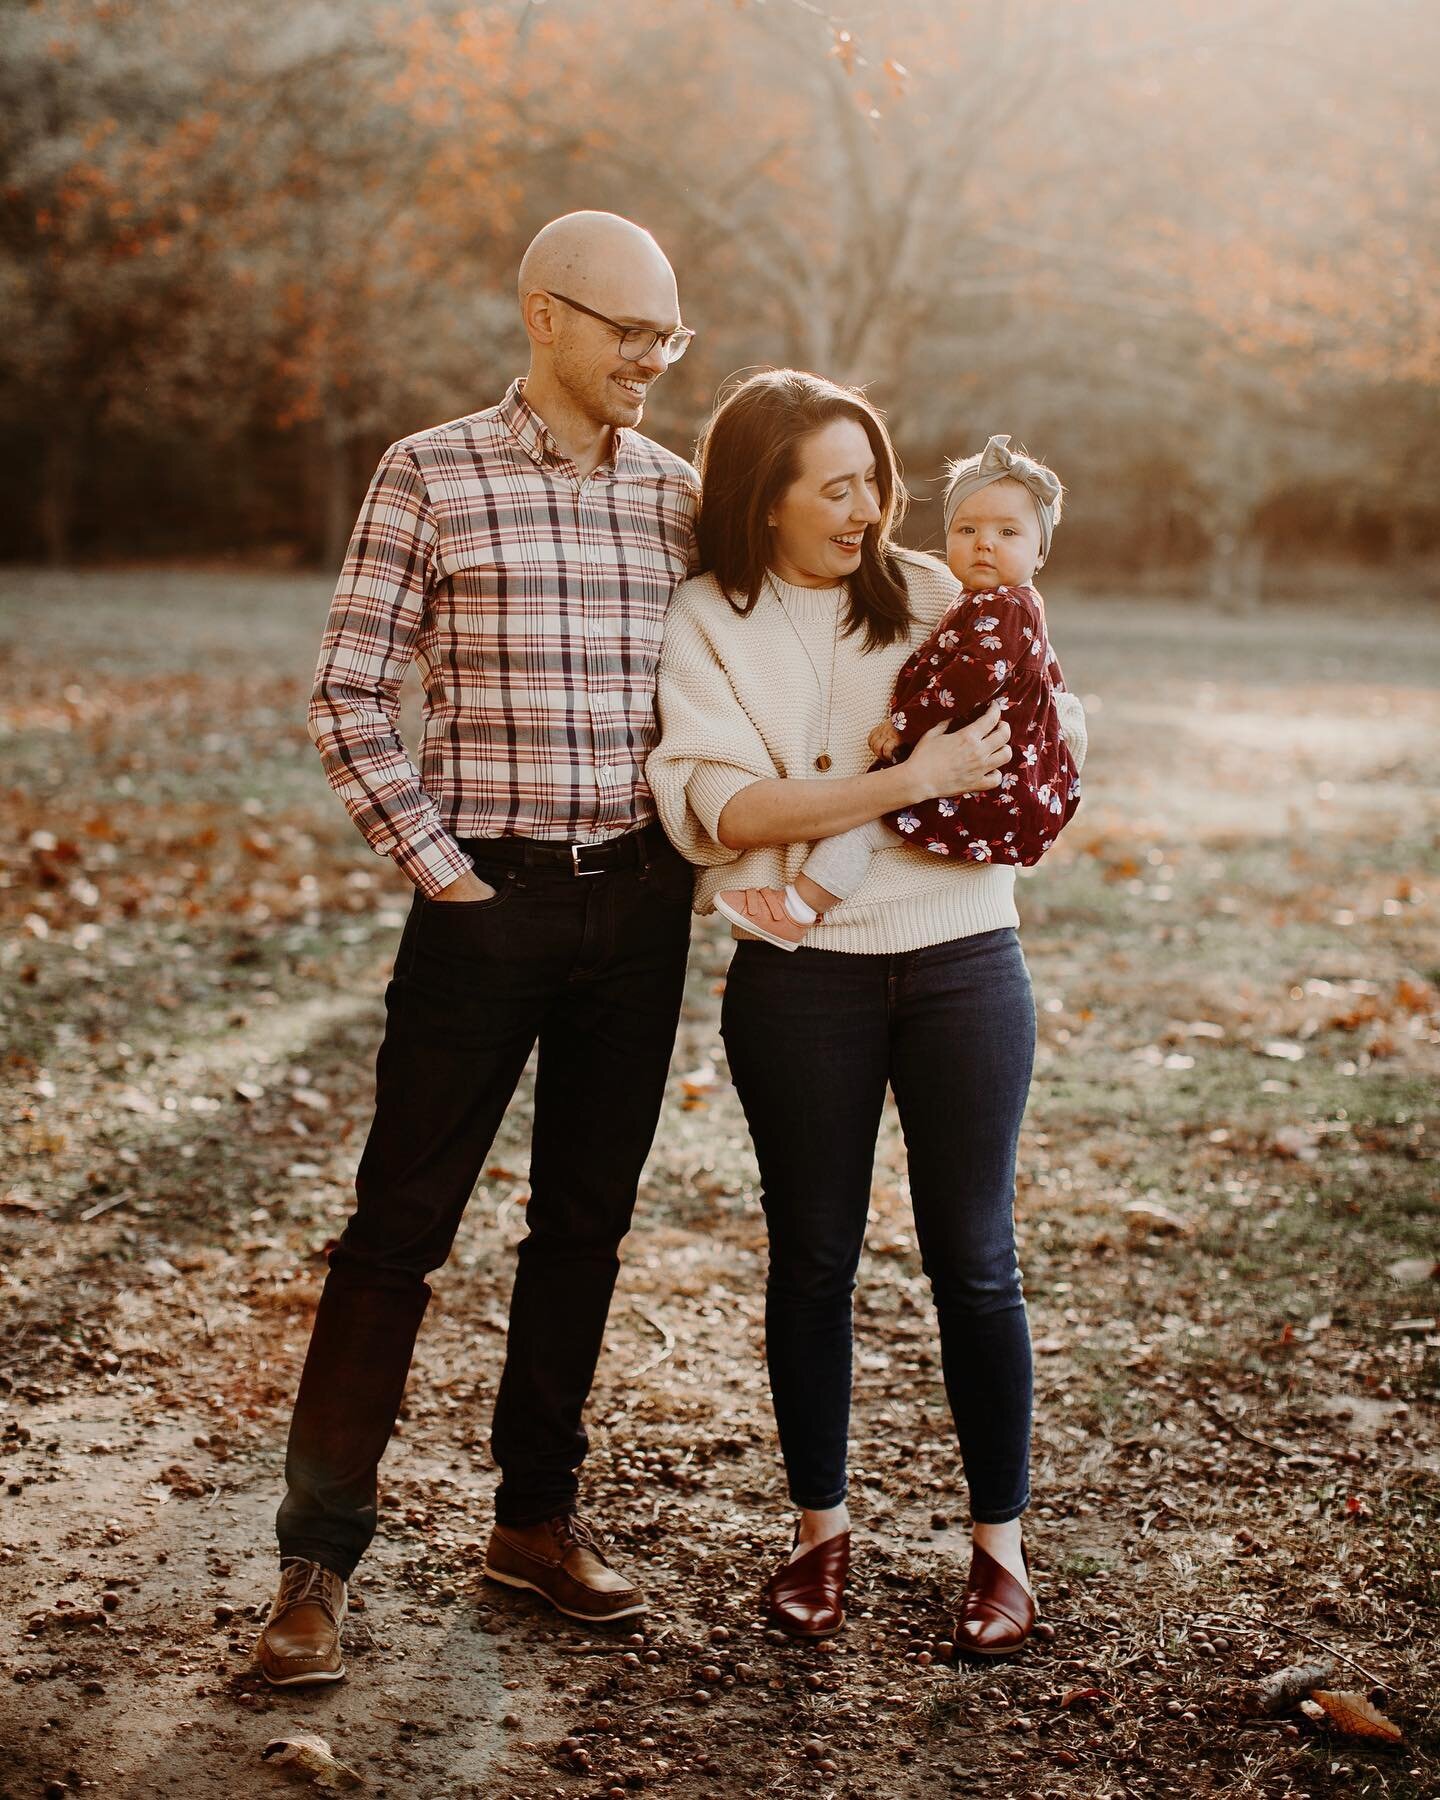 Who&rsquo;s ready for fall family sessions? I soooooo am. Message me today to set one up! 🍁
.⁣
.⁣
.⁣
.⁣
.⁣
#documentaryfamilies #hamptonroadsphotographer #northernvaphotographer #greenwichphotographer #alexandriavaphotographer #feelingmotherhood #dc